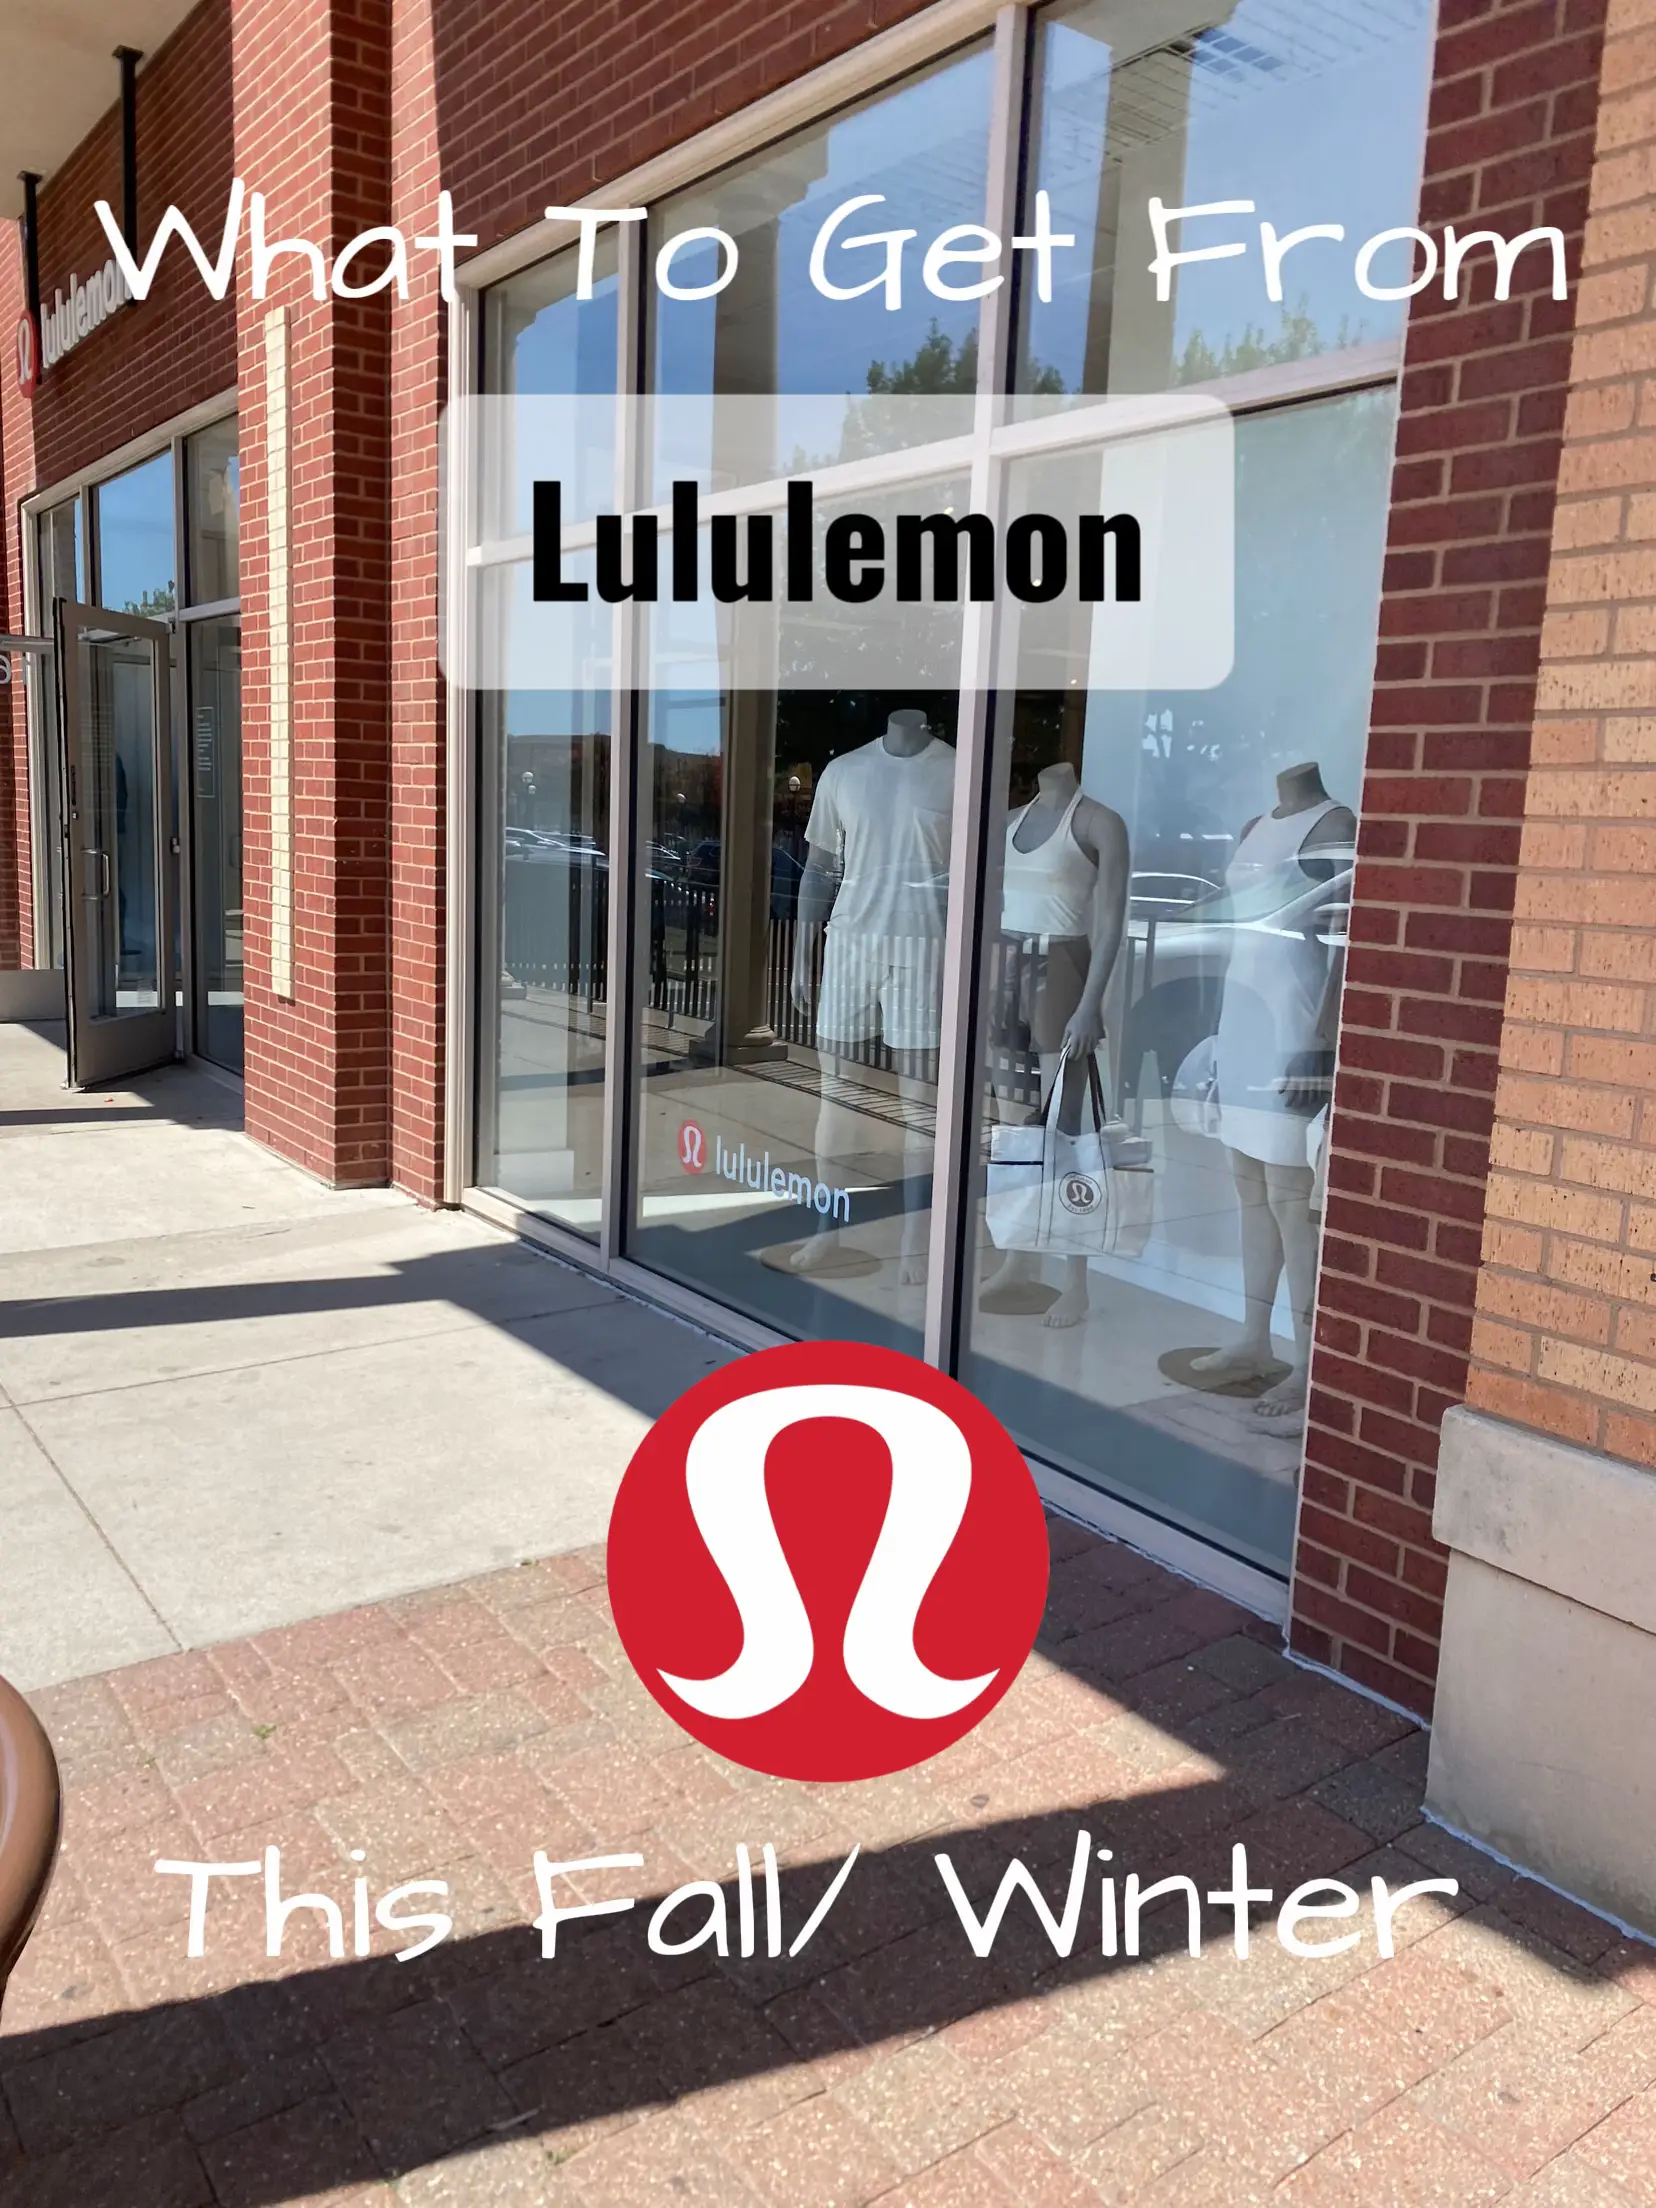 What To Get From Lululemon This Fall/ Winter, Gallery posted by Cali